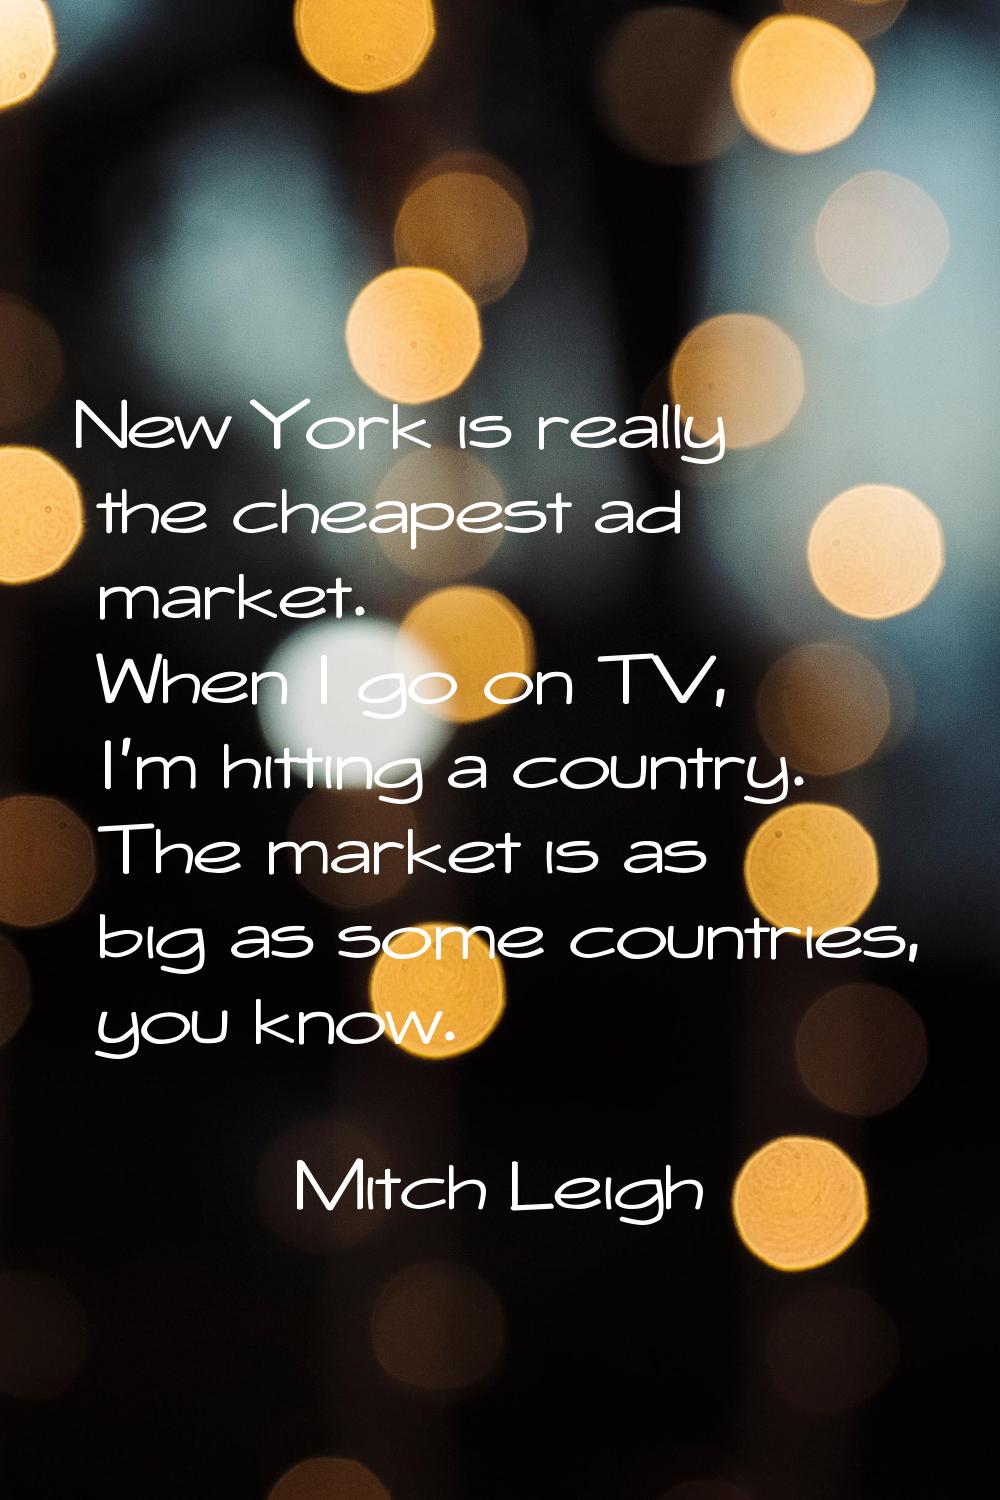 New York is really the cheapest ad market. When I go on TV, I'm hitting a country. The market is as